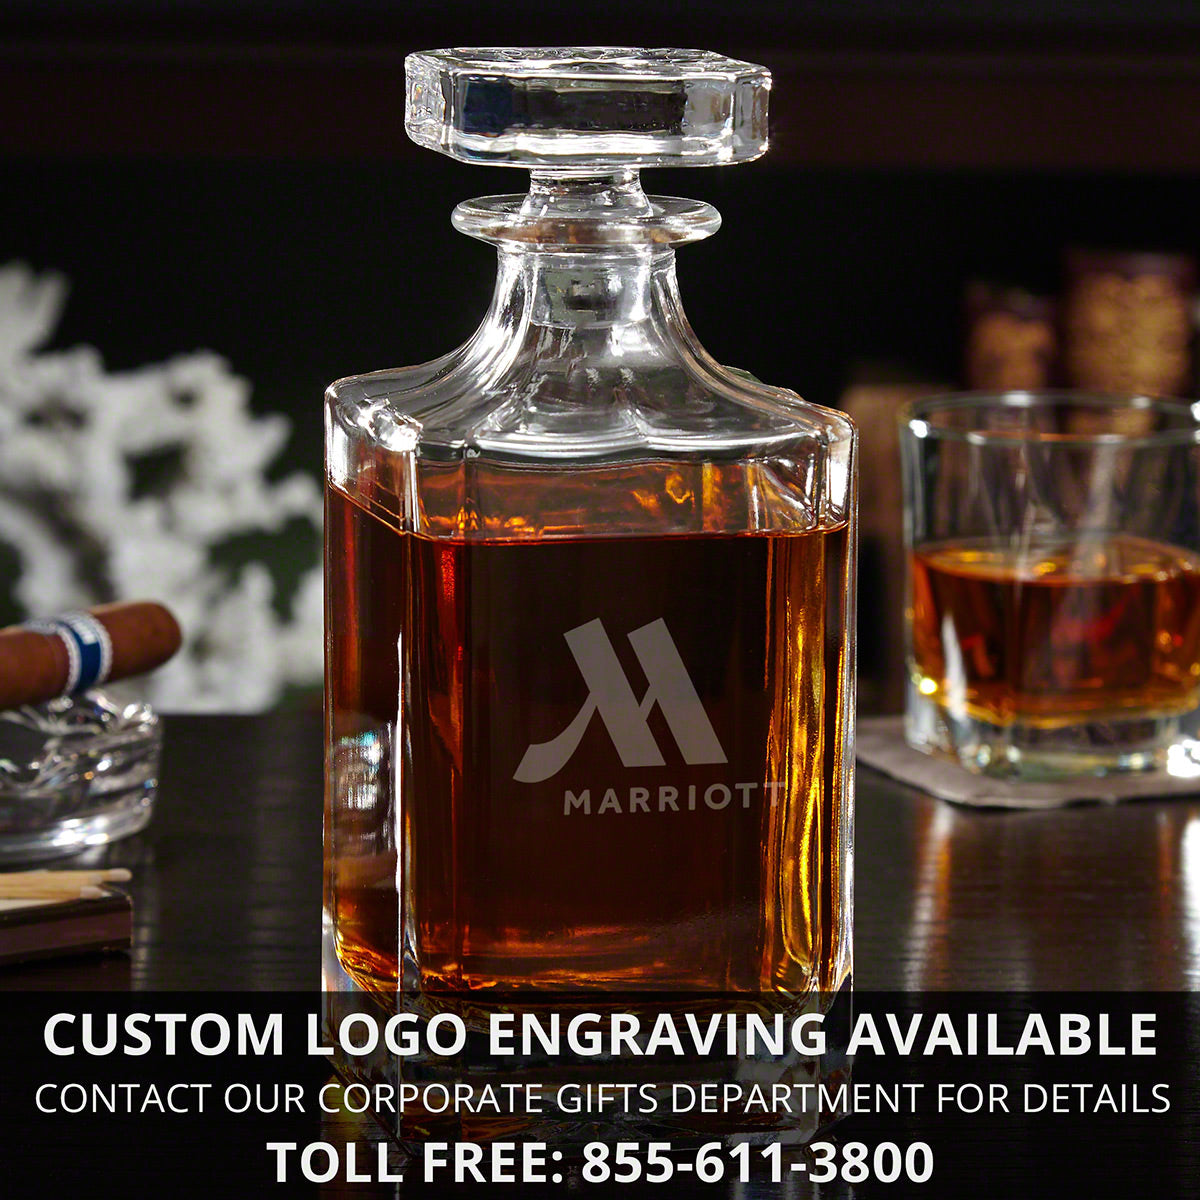 Personalized Whiskey Decanter Luxury Box Set with Rocks Glasses - 7pc 